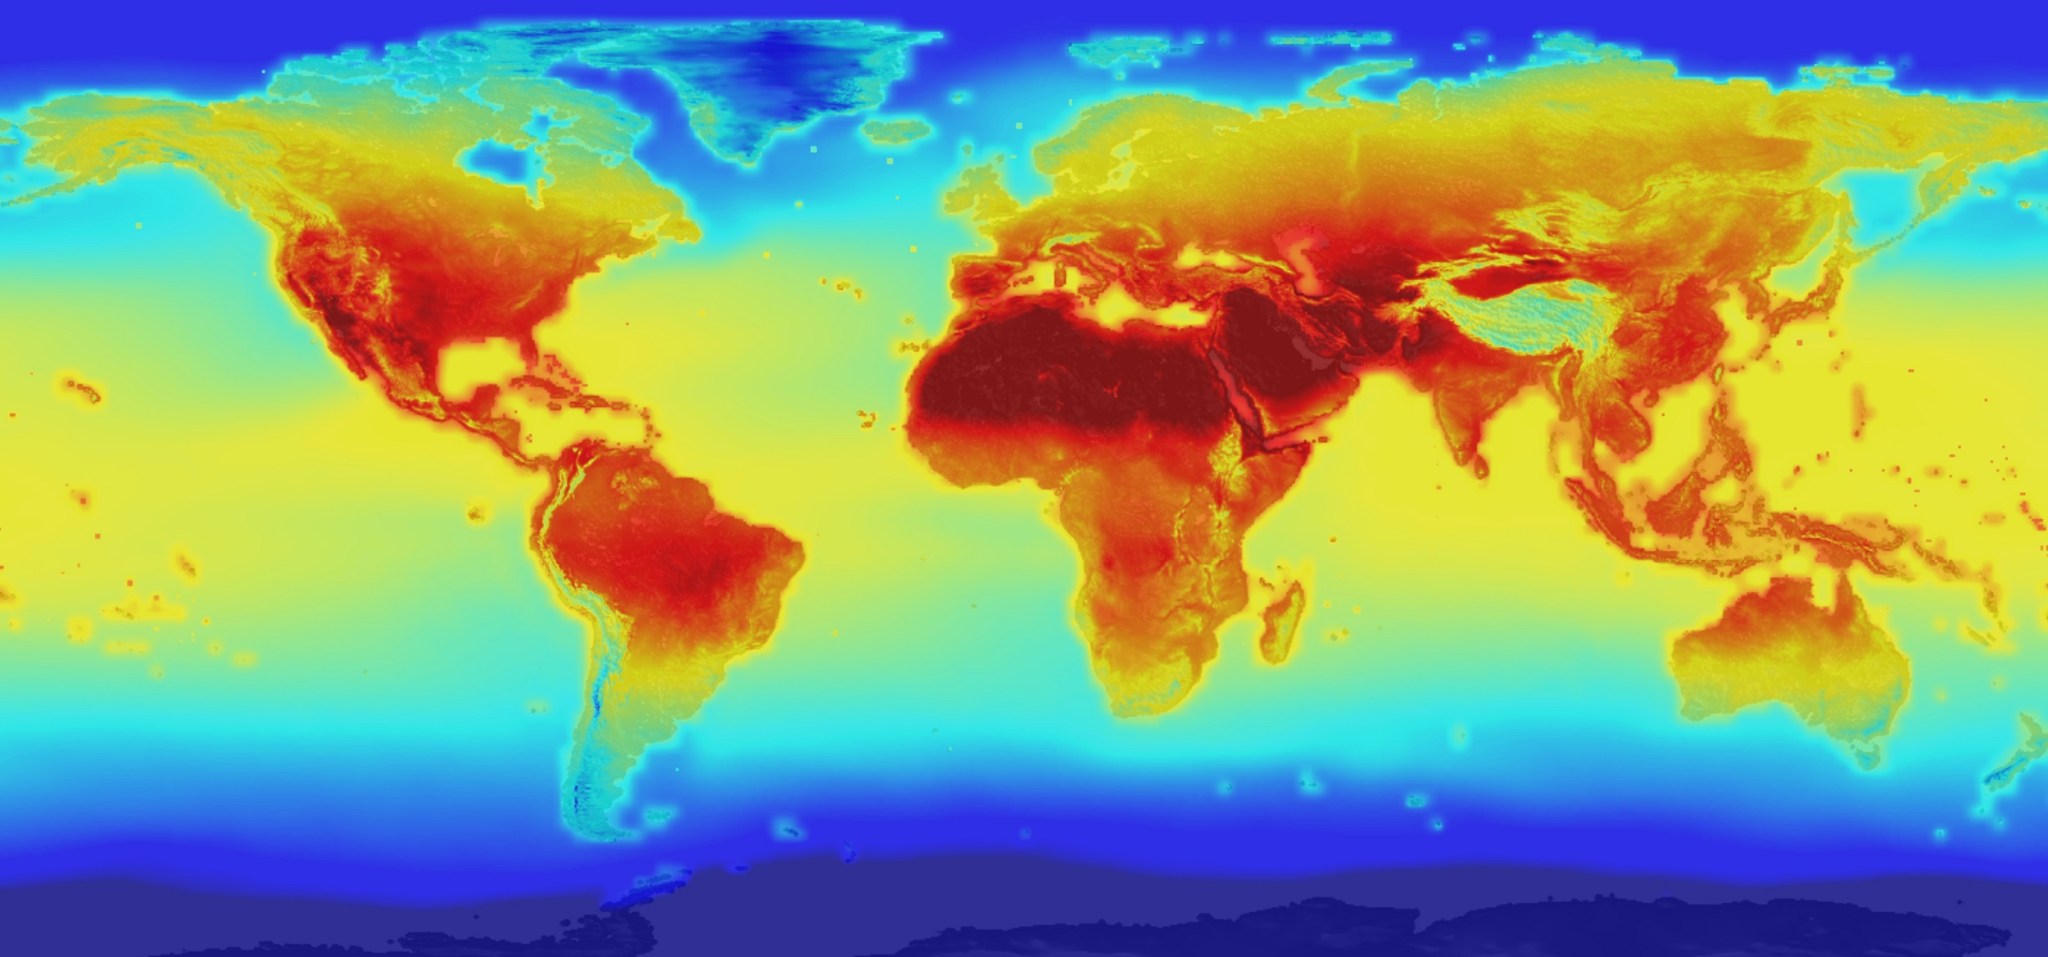 A world map with different regions colored according to predicted future temperature